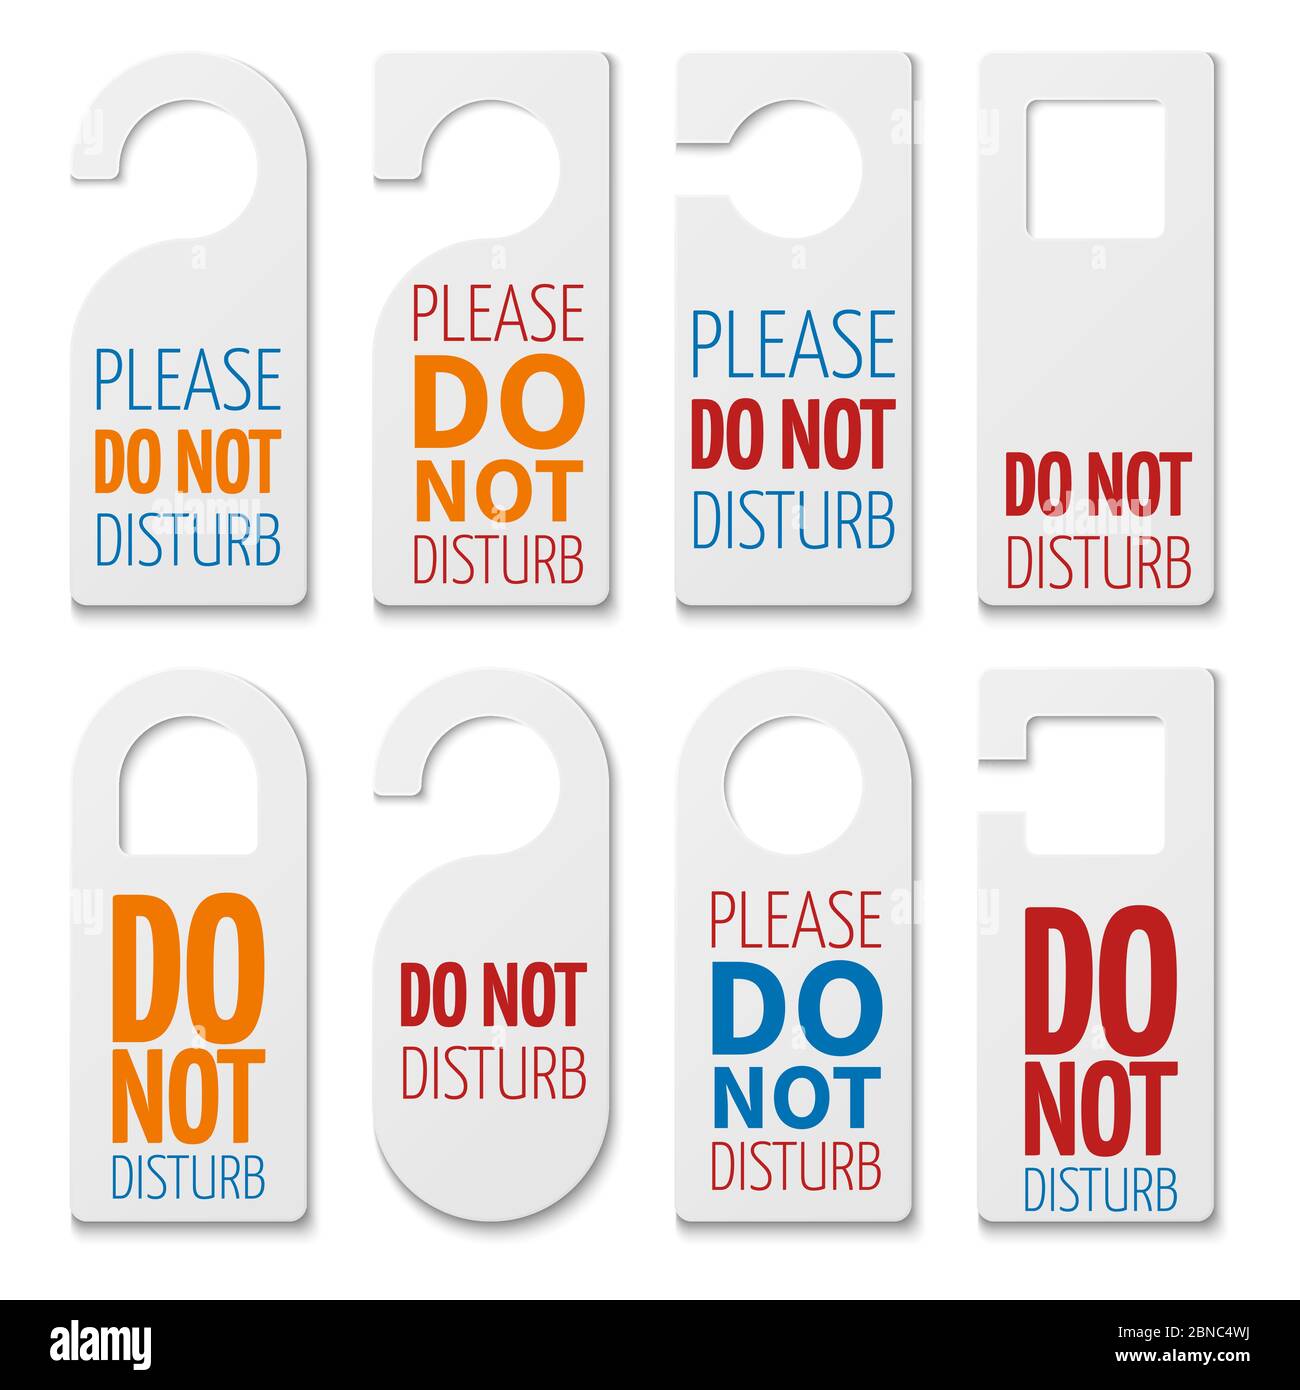 Do not disturb realistic plastic blanks vector collection. Illustration of not disturb tags of set for room hotel Stock Vector